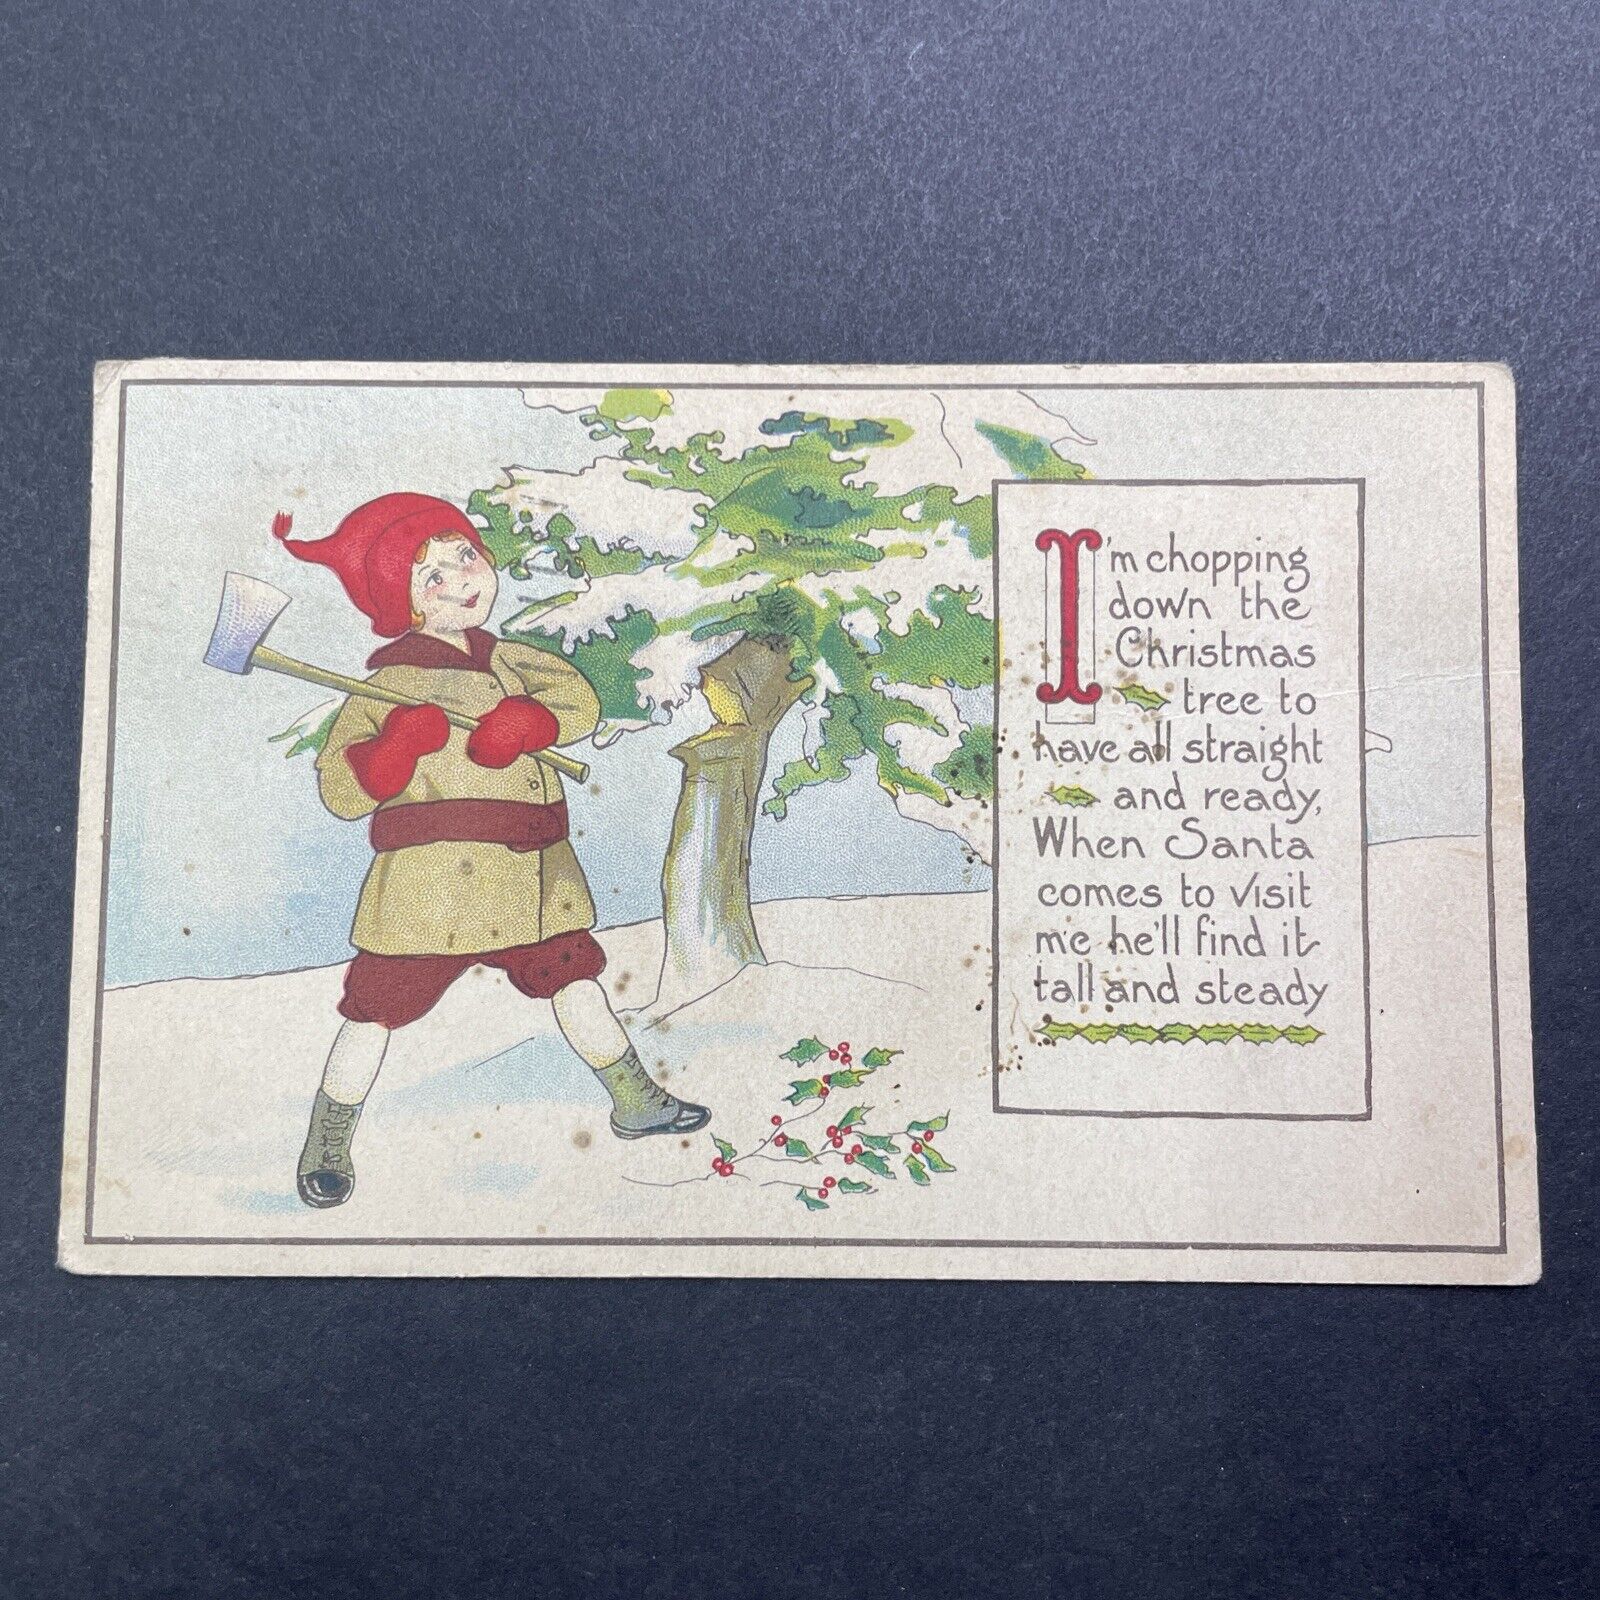 Antique 1924 Child Chopping Down A Christmas Tree With Axe Postcard V3475